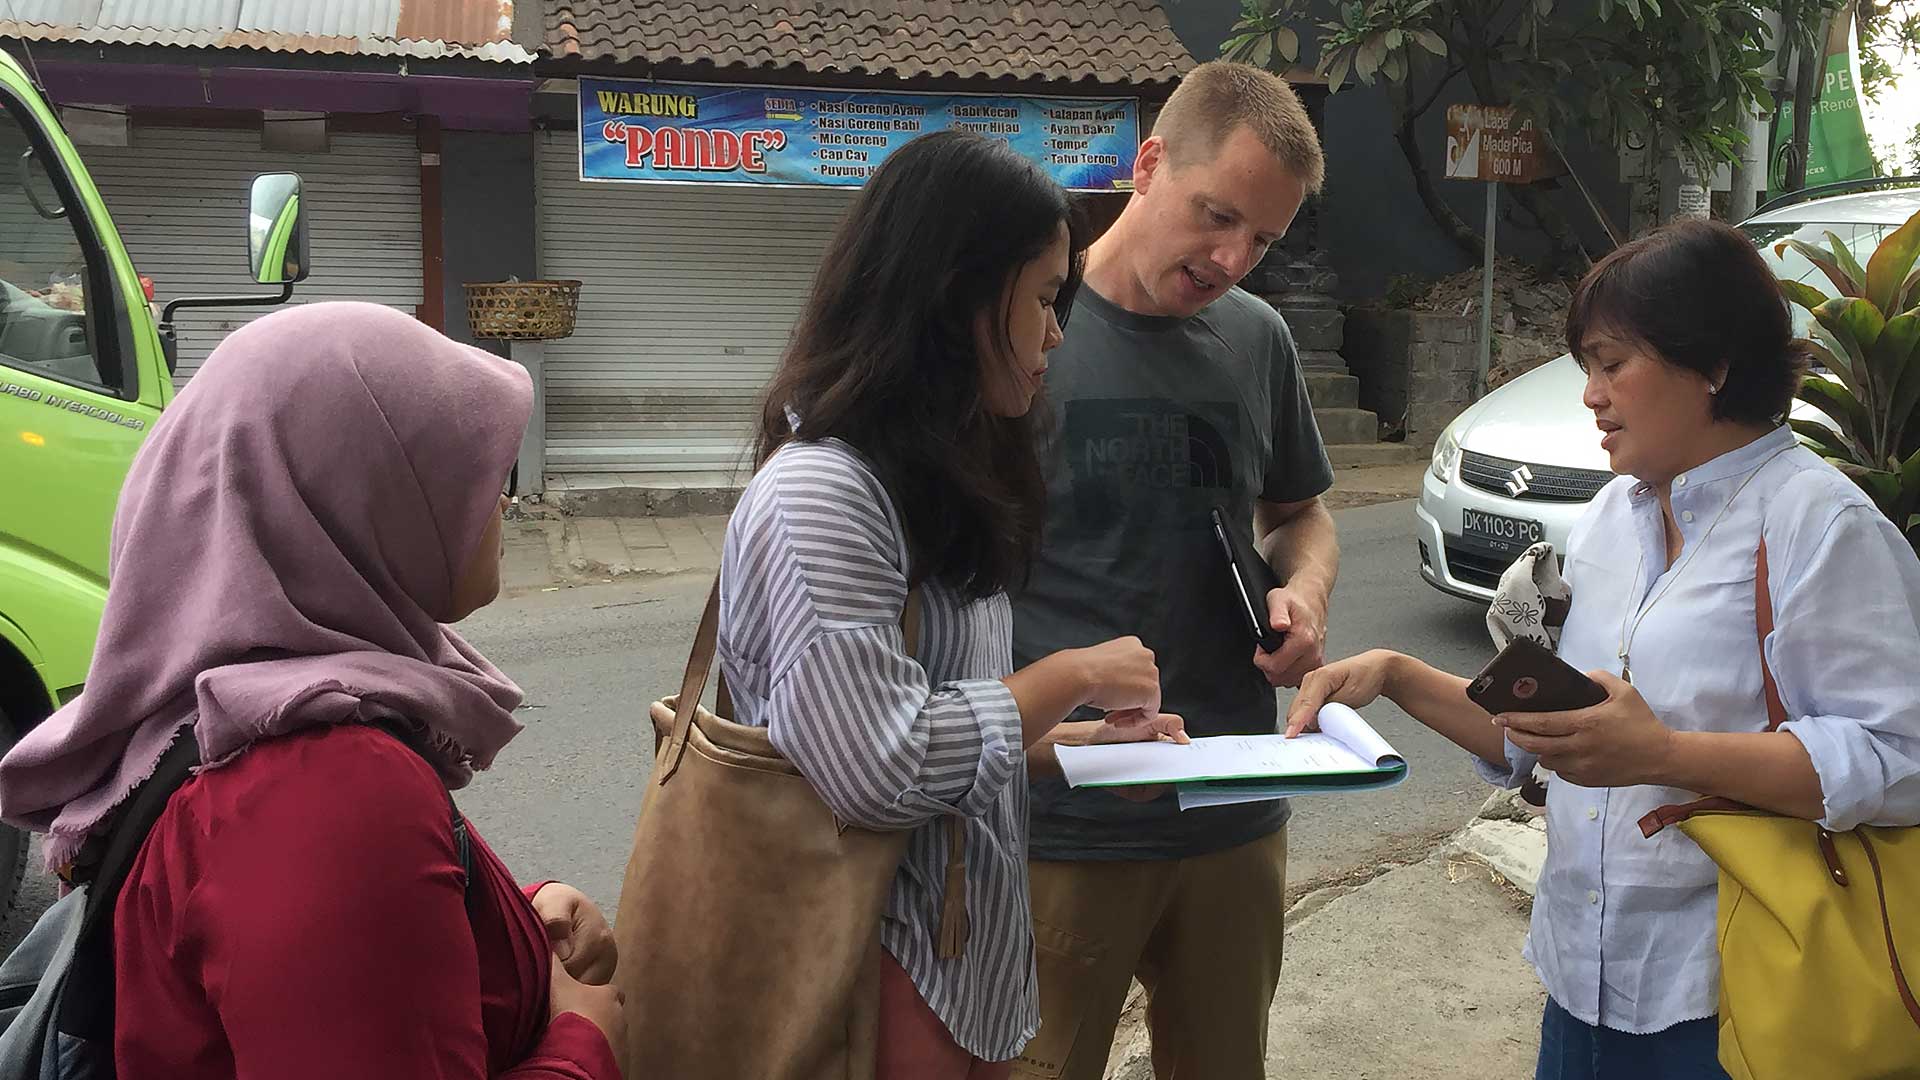 The researchers gather information in Indonesia